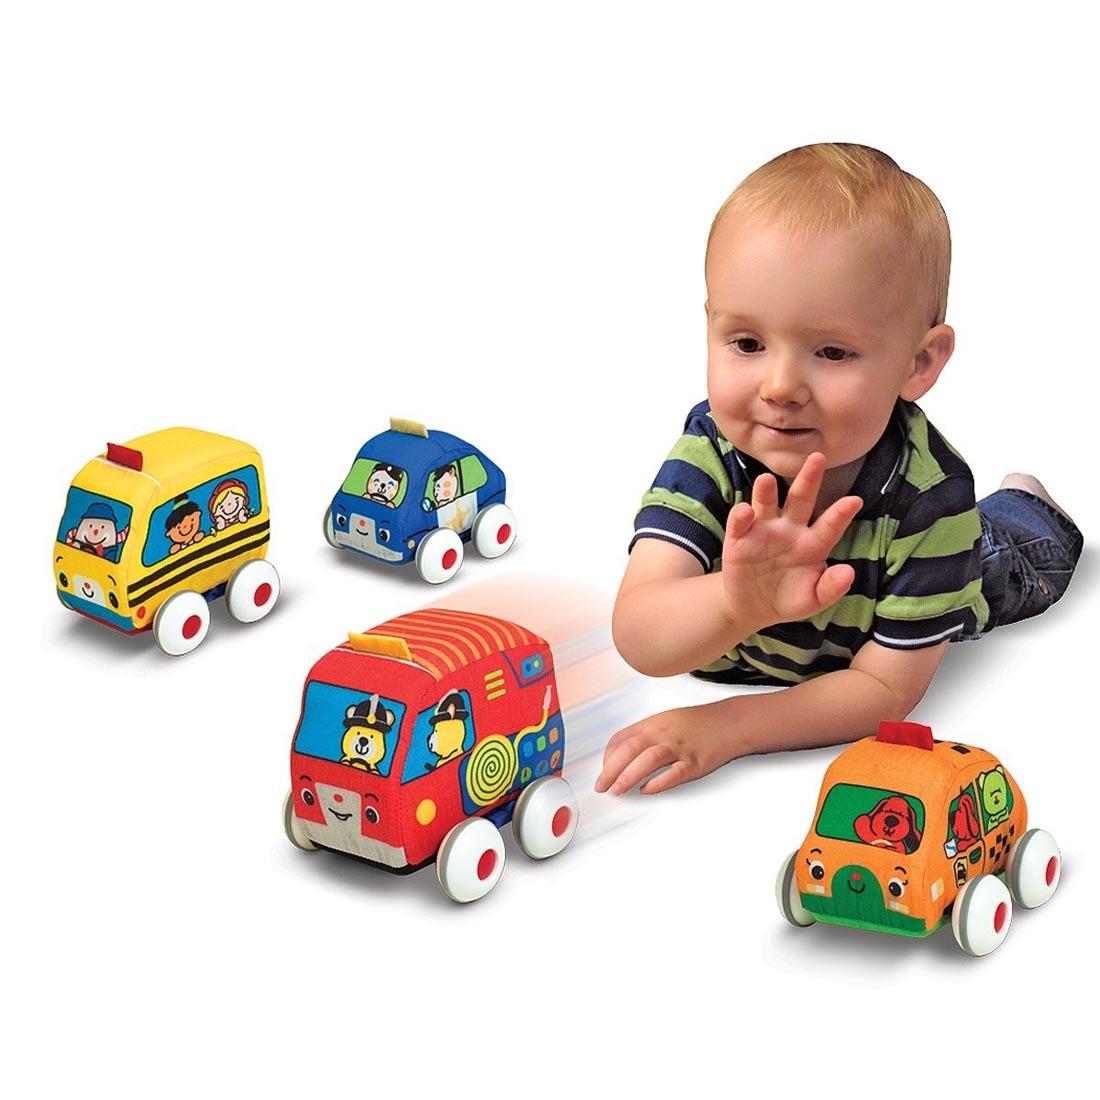 child playing with the Pull-Back Vehicles Set